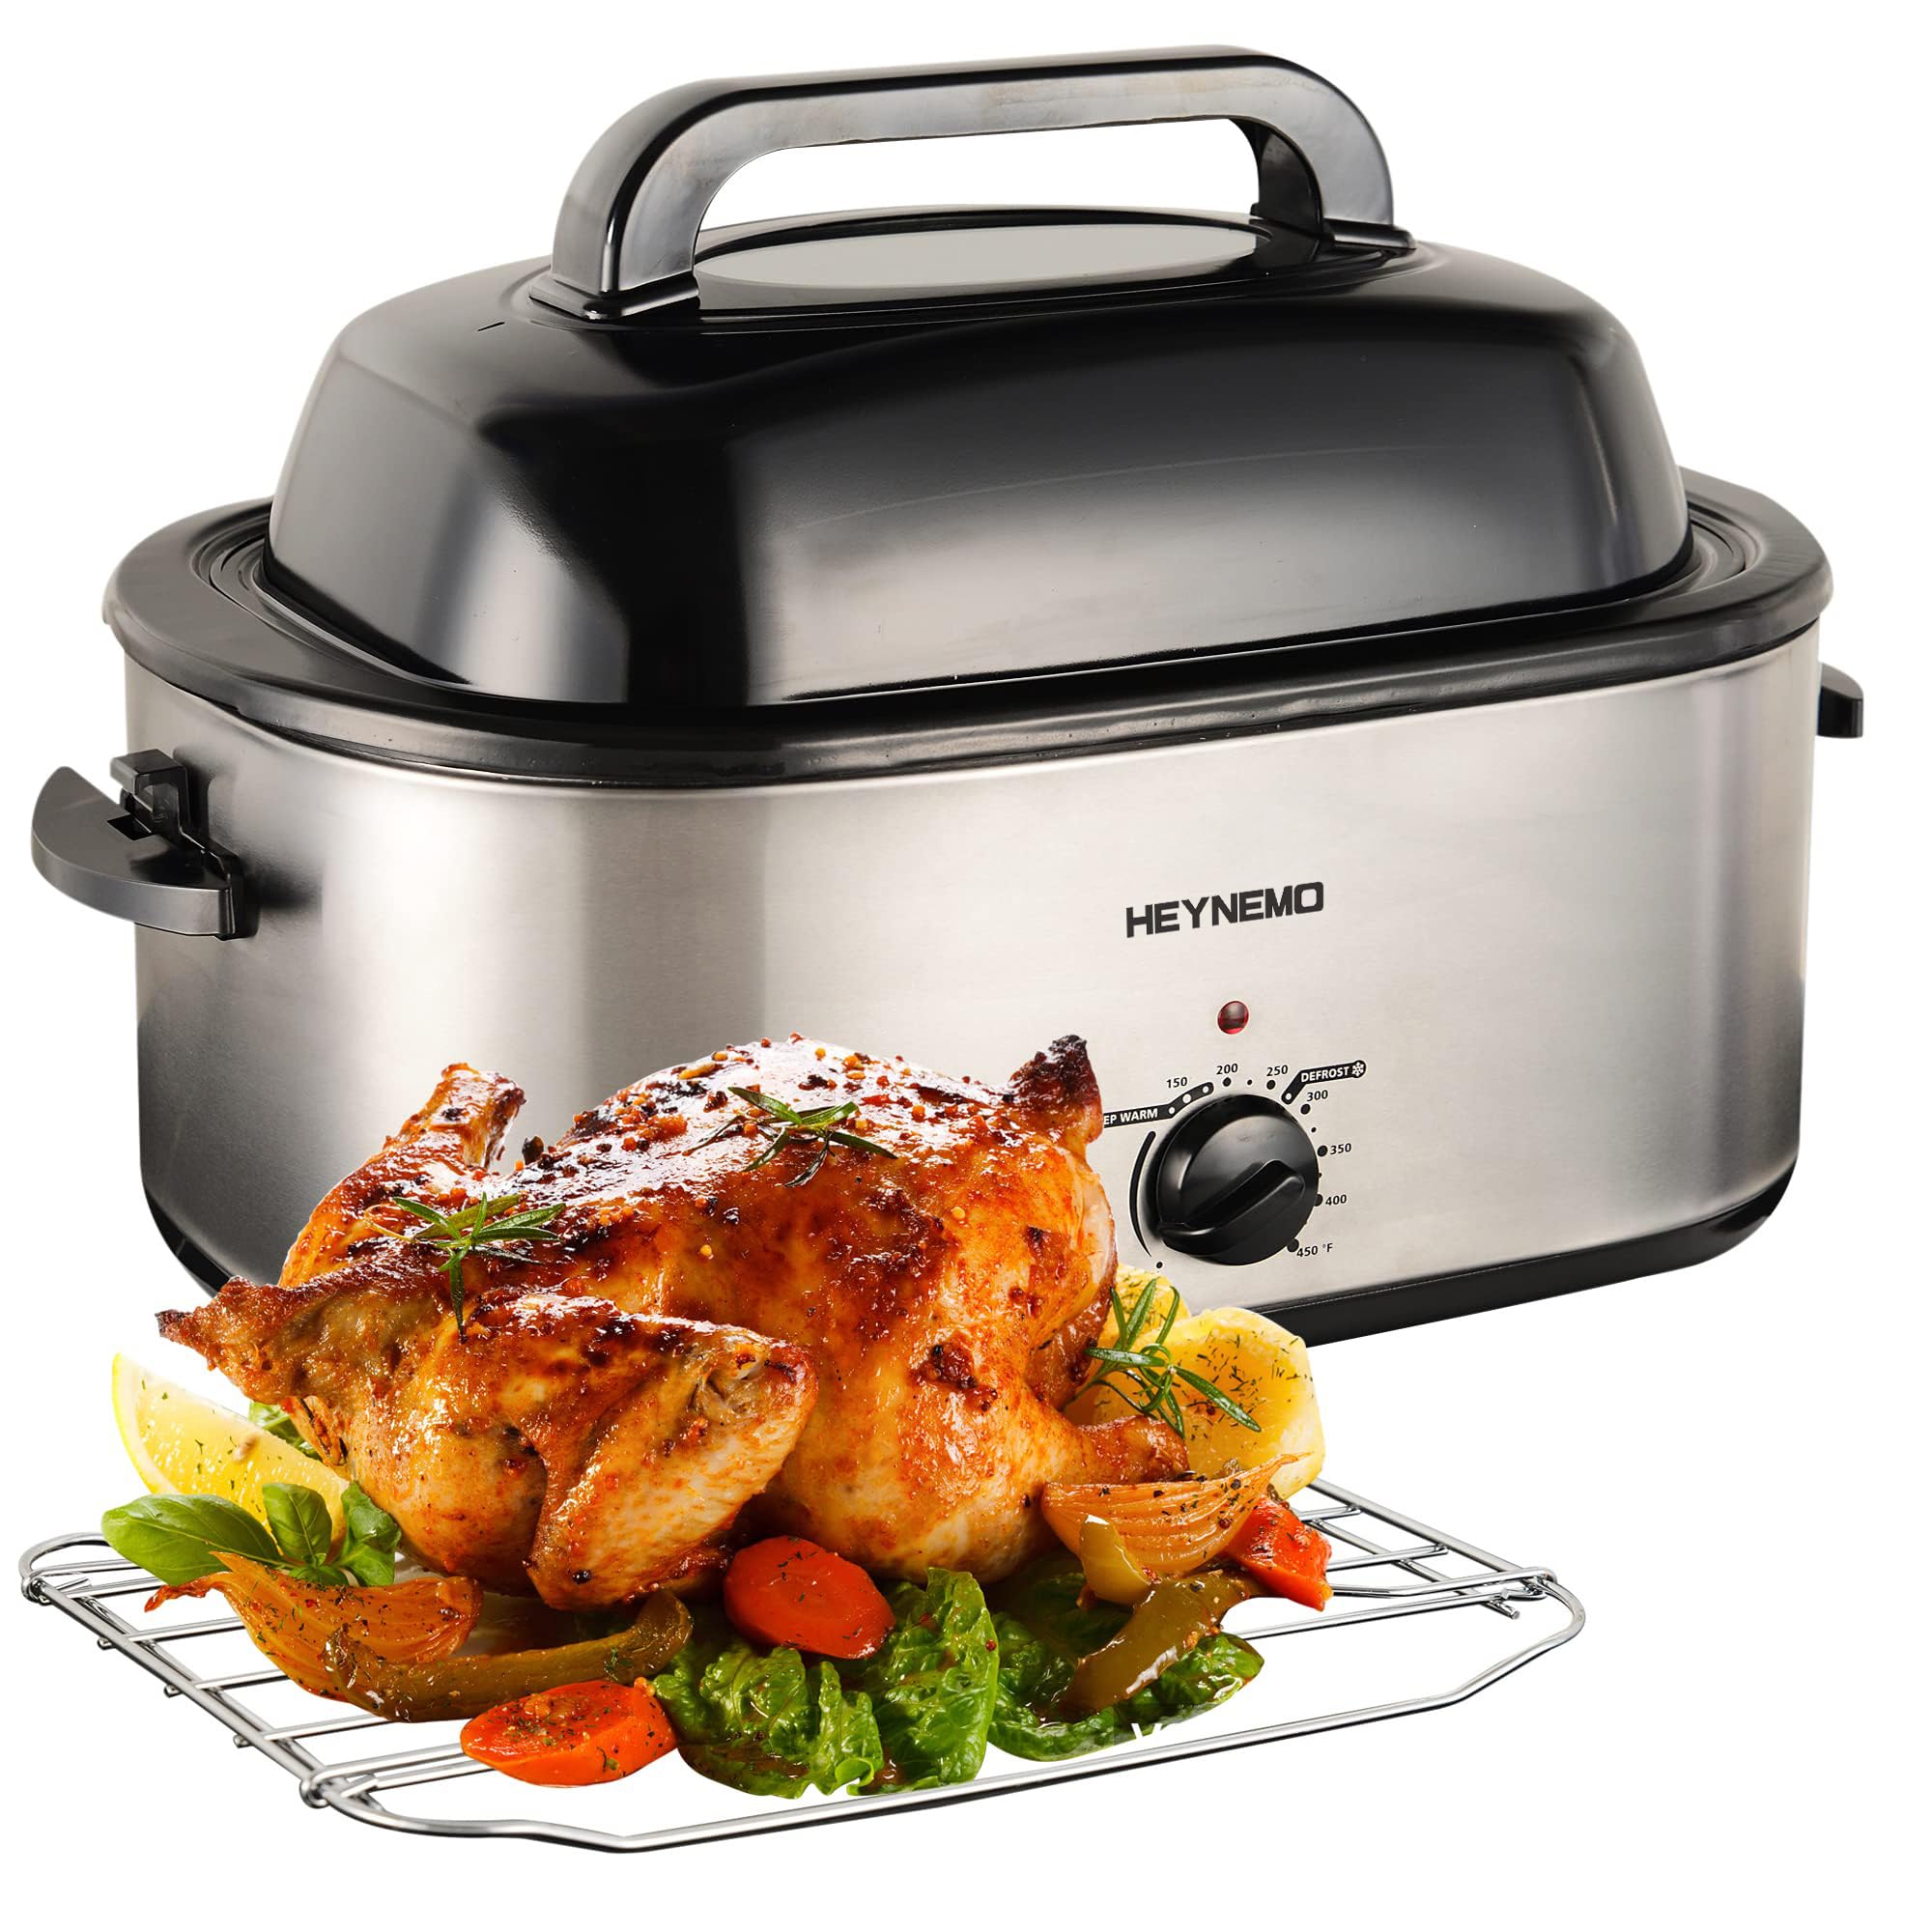 26 Quart Electric Roaster Oven, Turkey Roaster with Viewing Lid, Large Stainless Steel Roaster Oven Silver